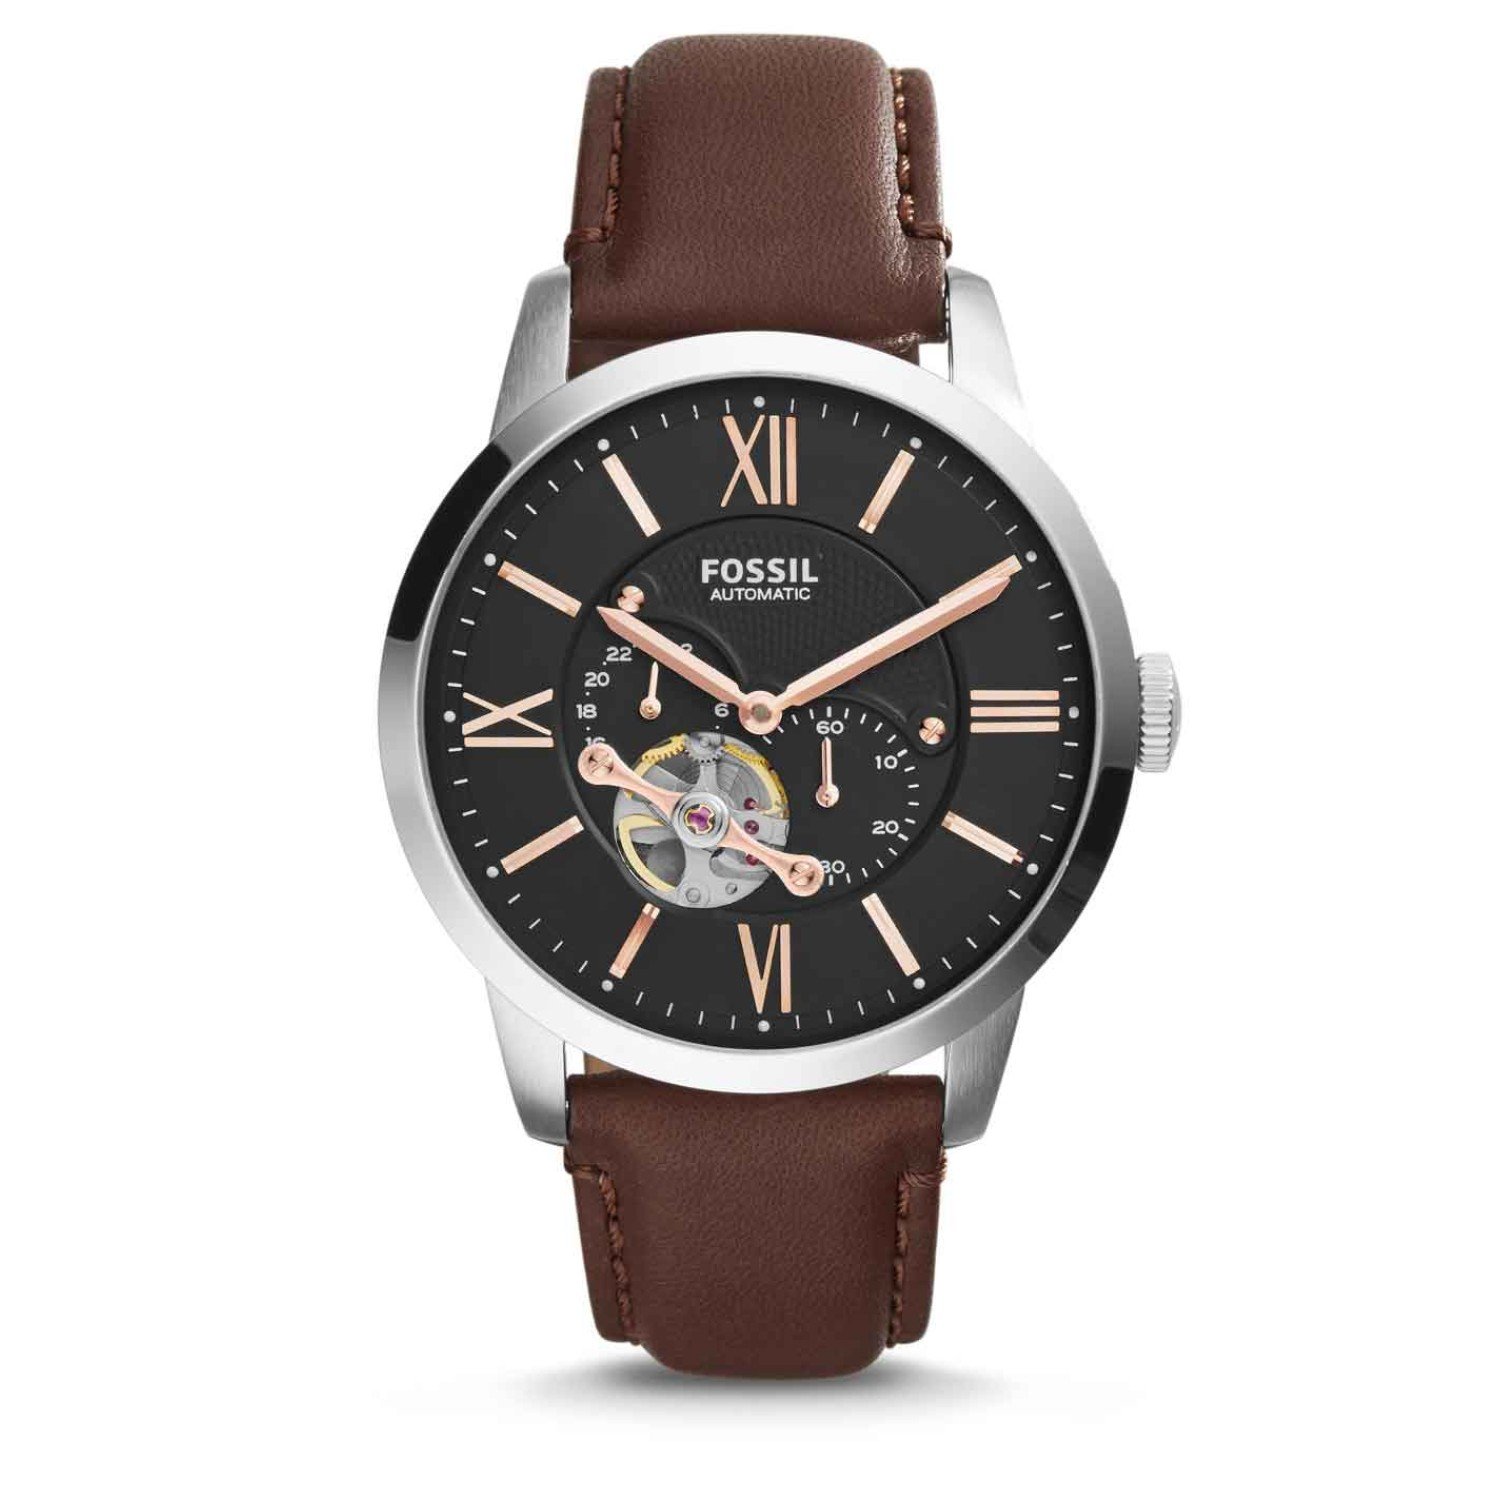 ME3061P Fossil Townsman Automatic Leather Watch. From desk to dinner, daily commute to jet-set journey, think of Townsman as his best-dressed essential. Crafted with an exposed automatic movement, its a sleek, pulled-together style that never takes itself